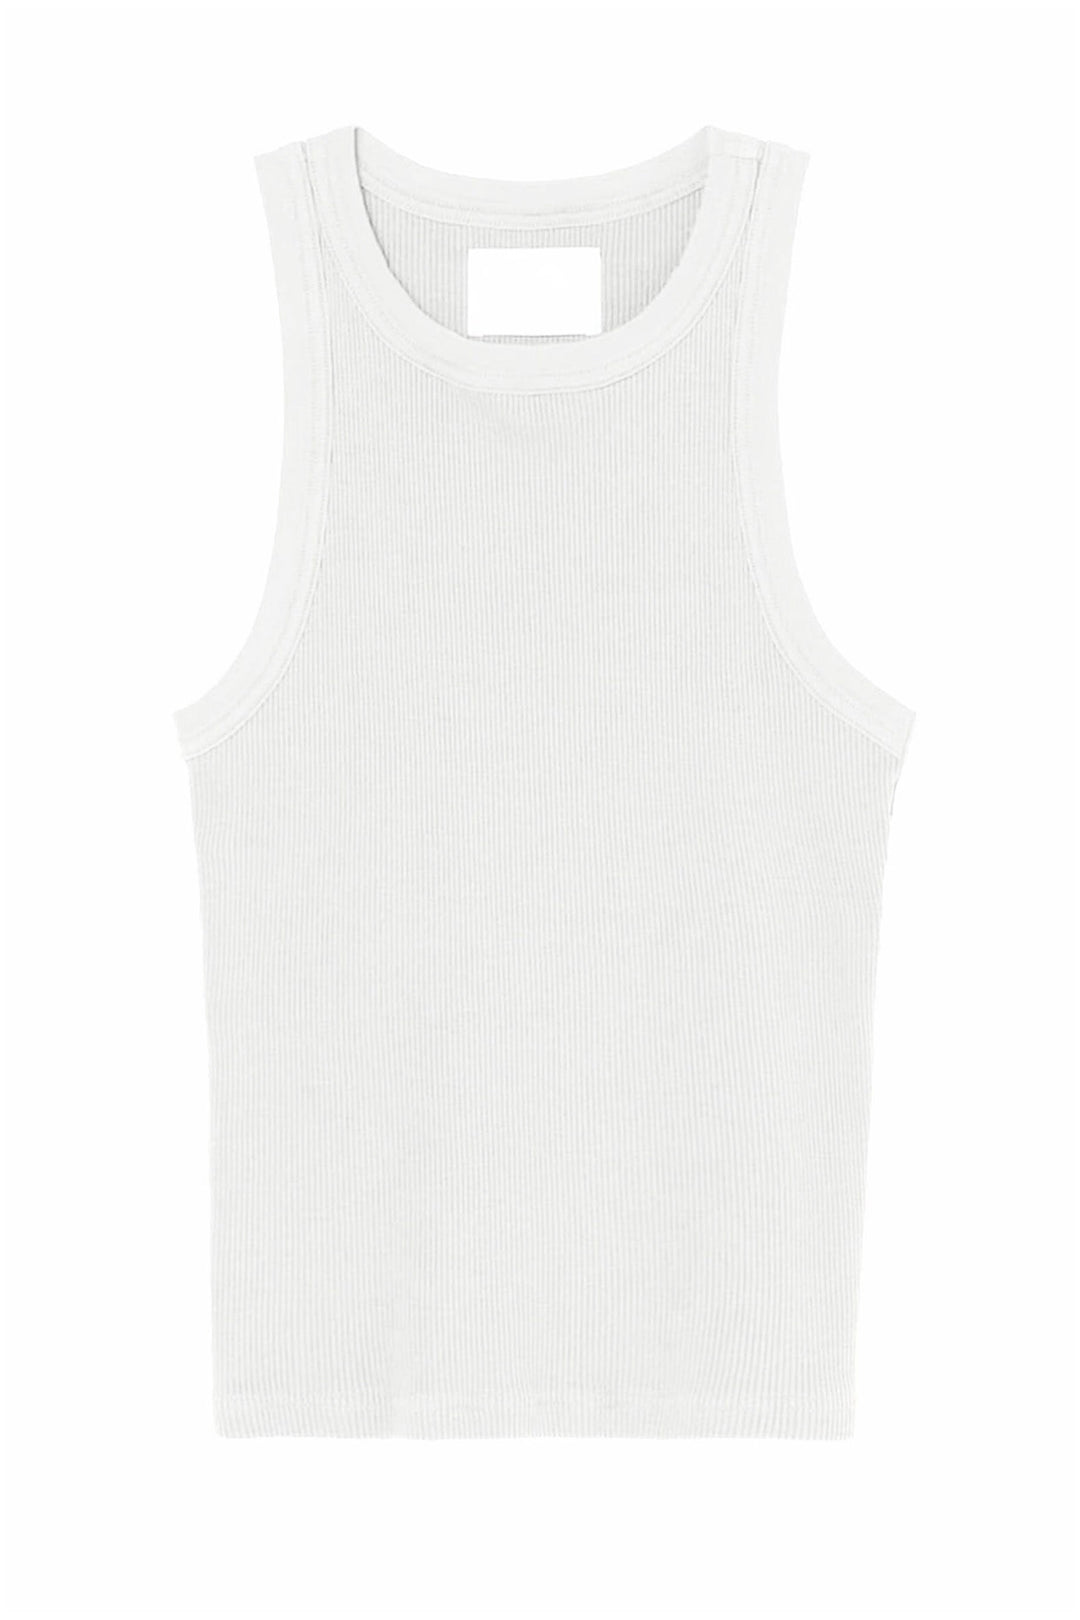 Citizens of Humanity Isabel Tank - White